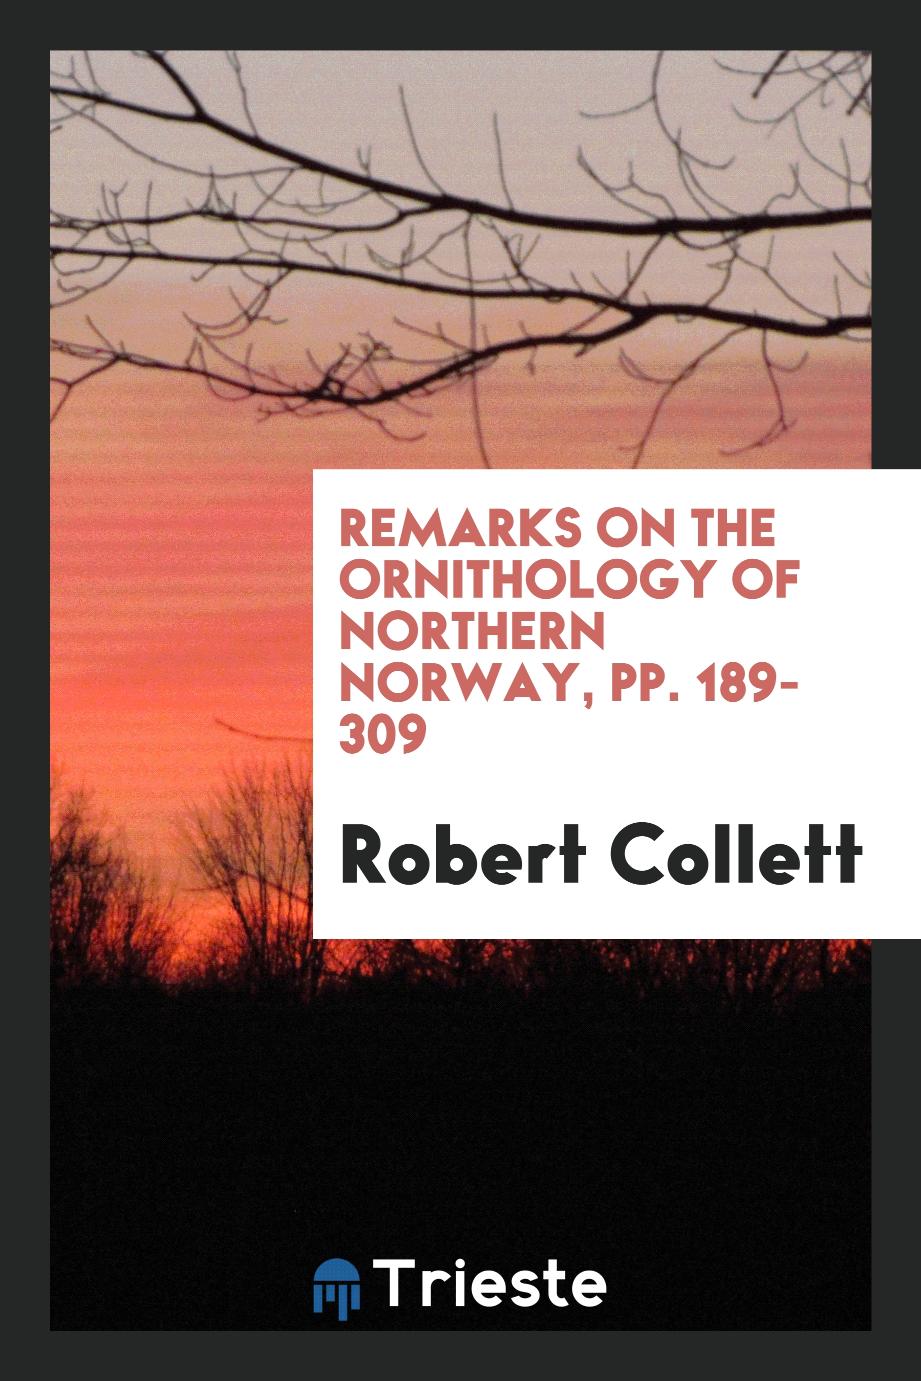 Remarks on the Ornithology of Northern Norway, pp. 189-309